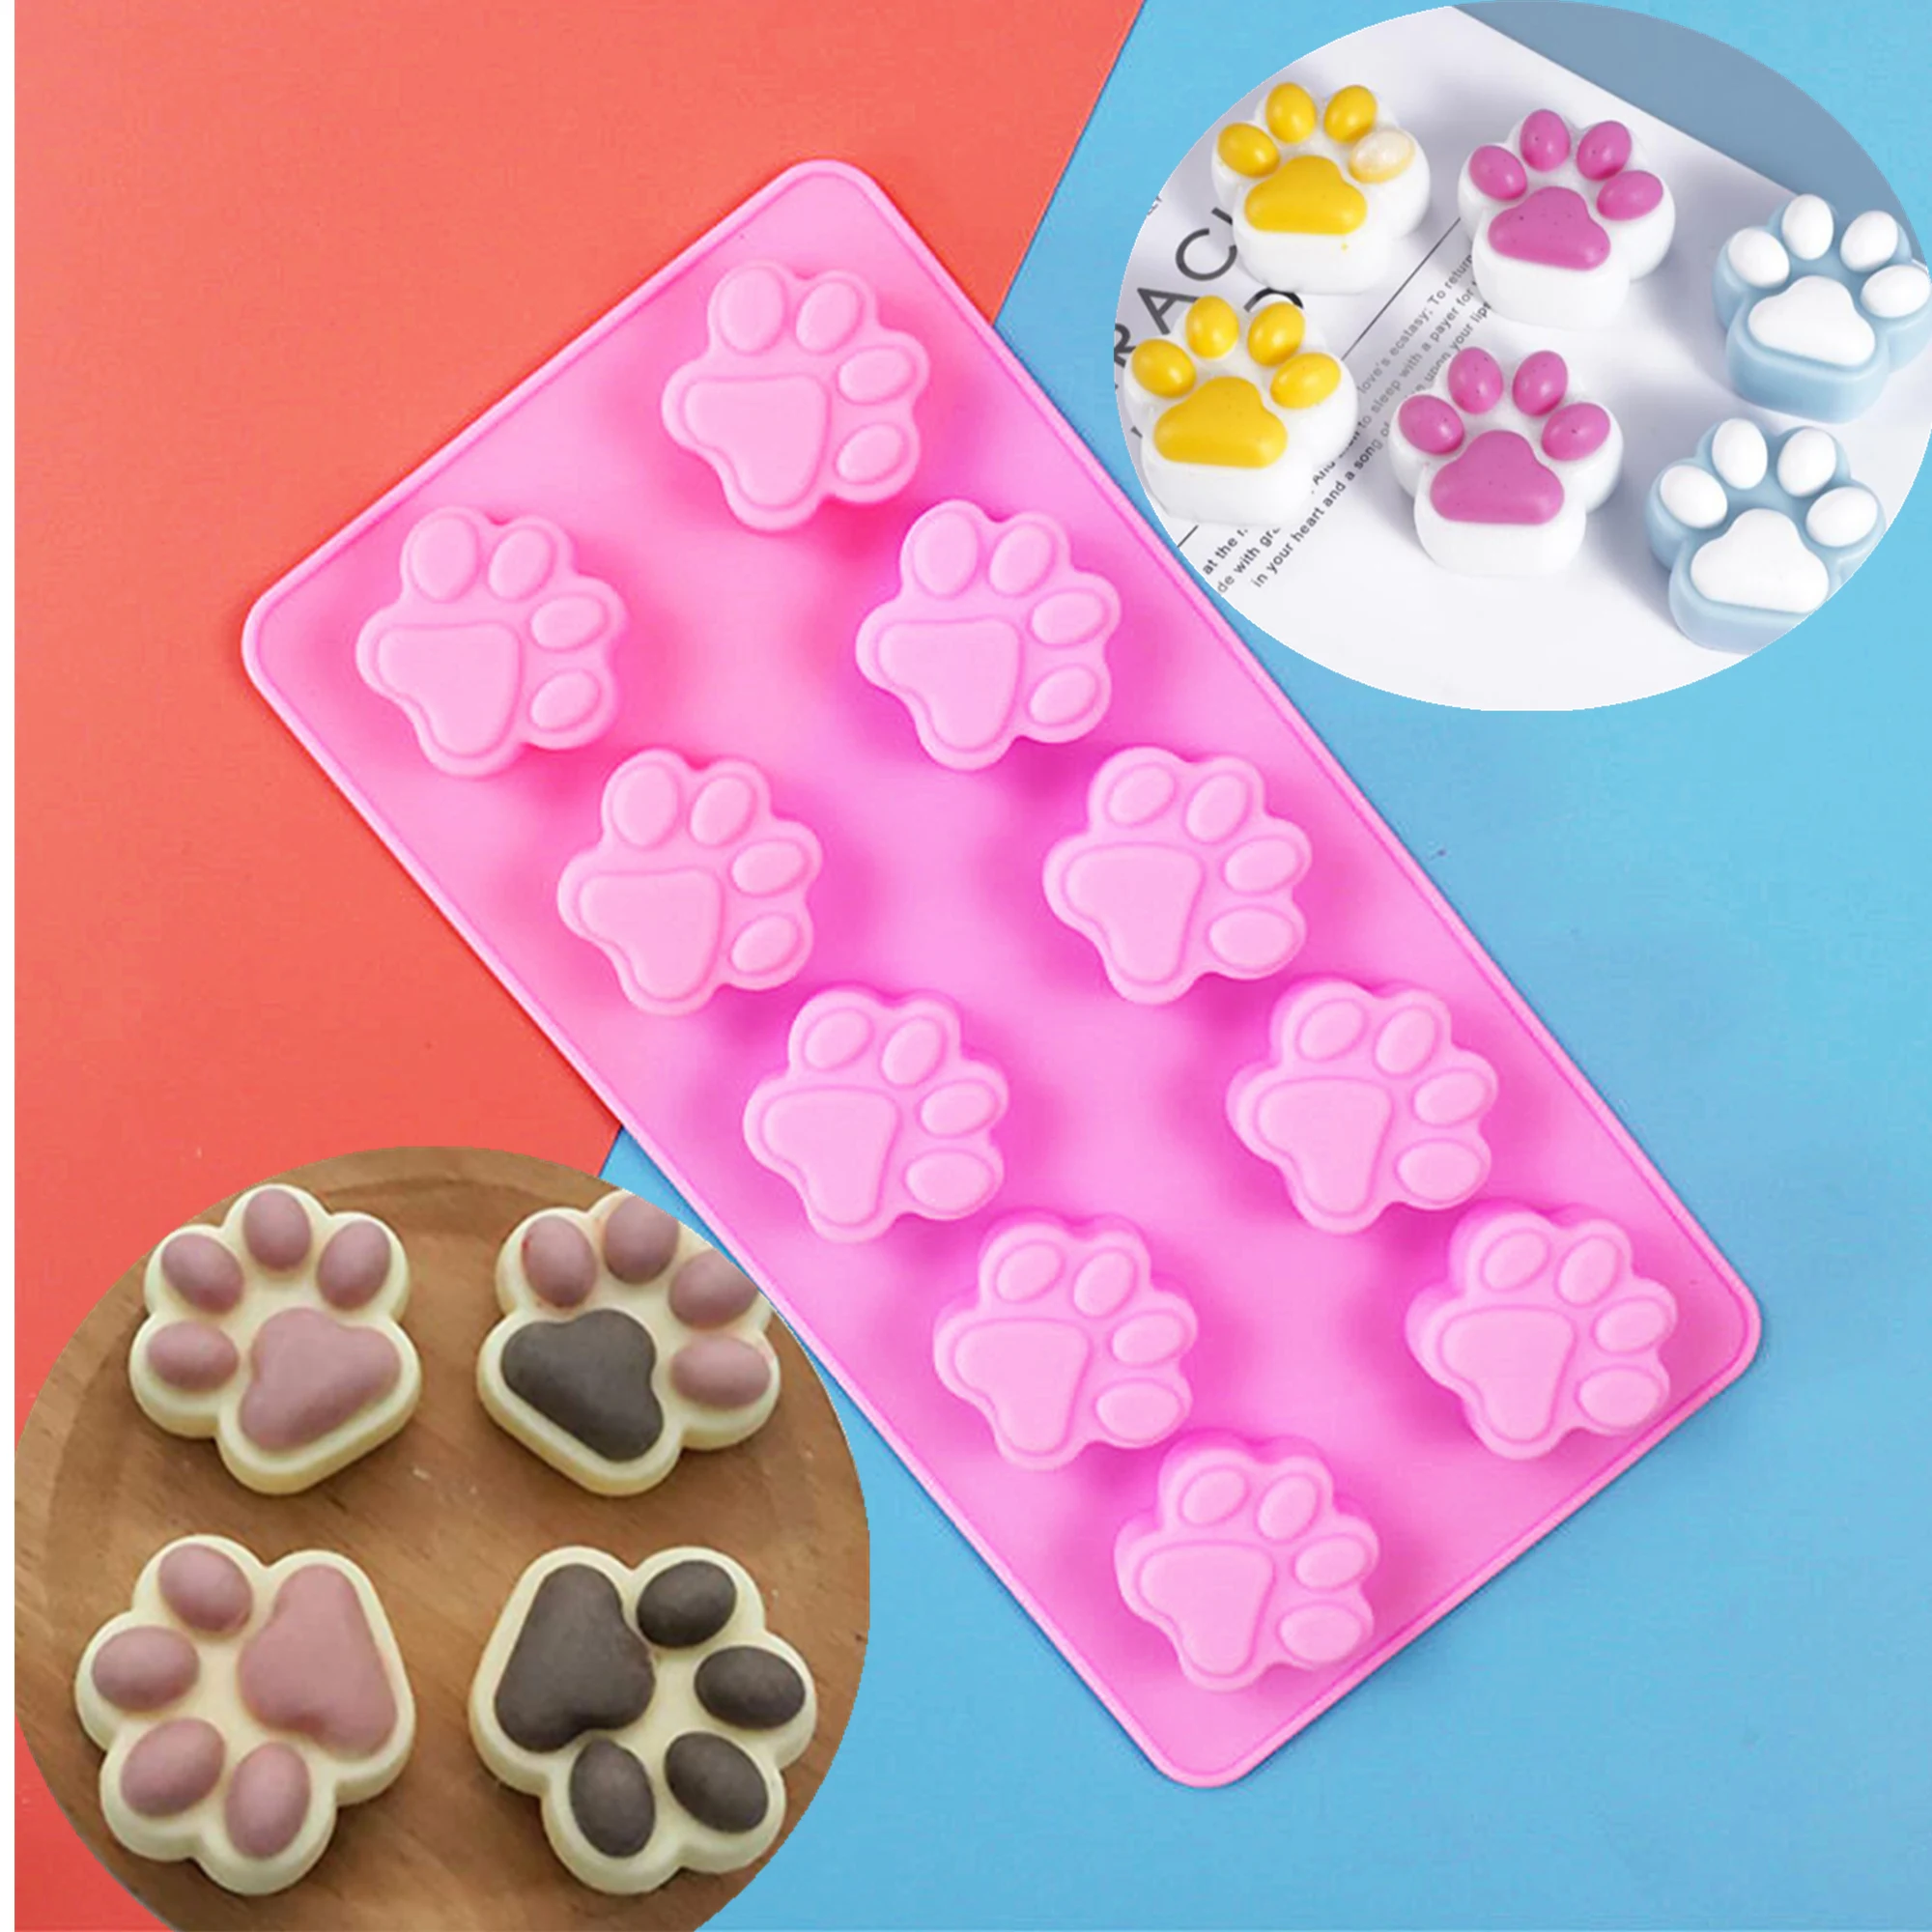 

Luyou Puppy Dog Paw Ice Trays Silicone Fondant Molds Soap Chocolate Jelly Candy Mold Cake Decorating Baking Tools Moulds M2048